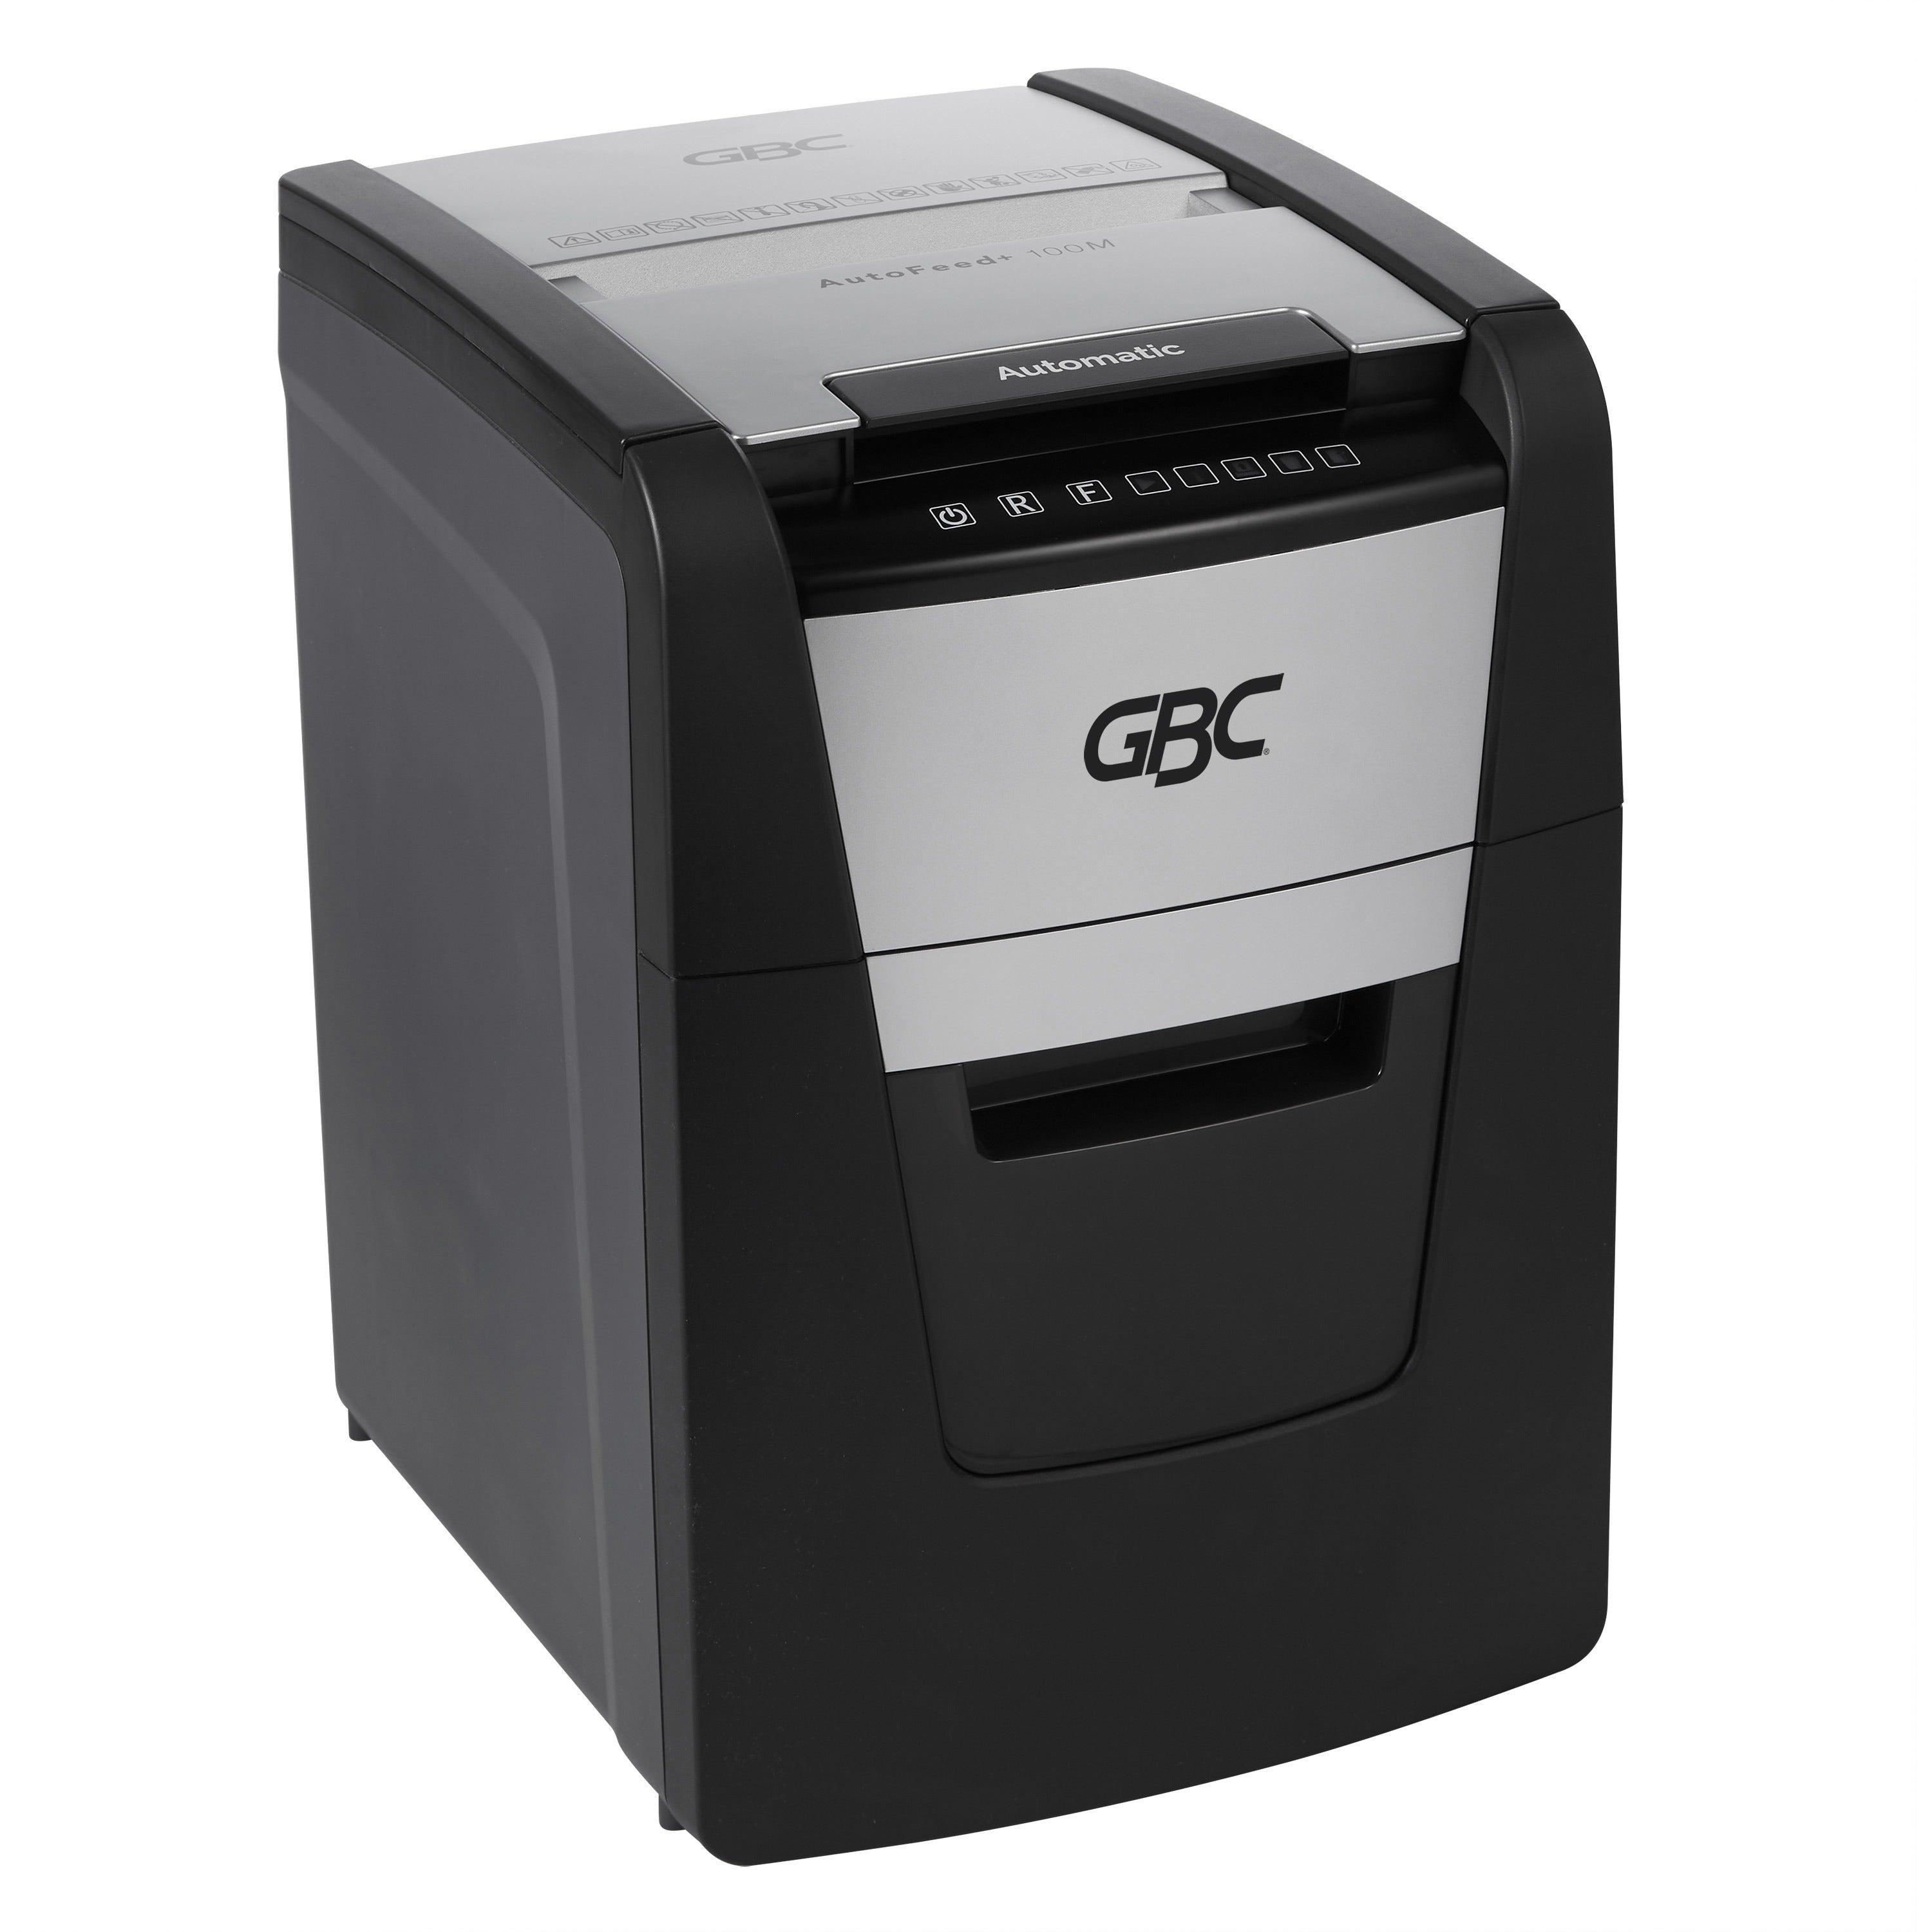 gbc-autofeed+-home-office-shredder-100m-micro-cut-100-sheets-continuous-shredder-micro-cut-6-per-pass-for-shredding-credit-card-paper-clip-staples-paper-p-5-20-minute-run-time-9-gal-wastebin-capacity-black_gbcwsm1757603 - 1